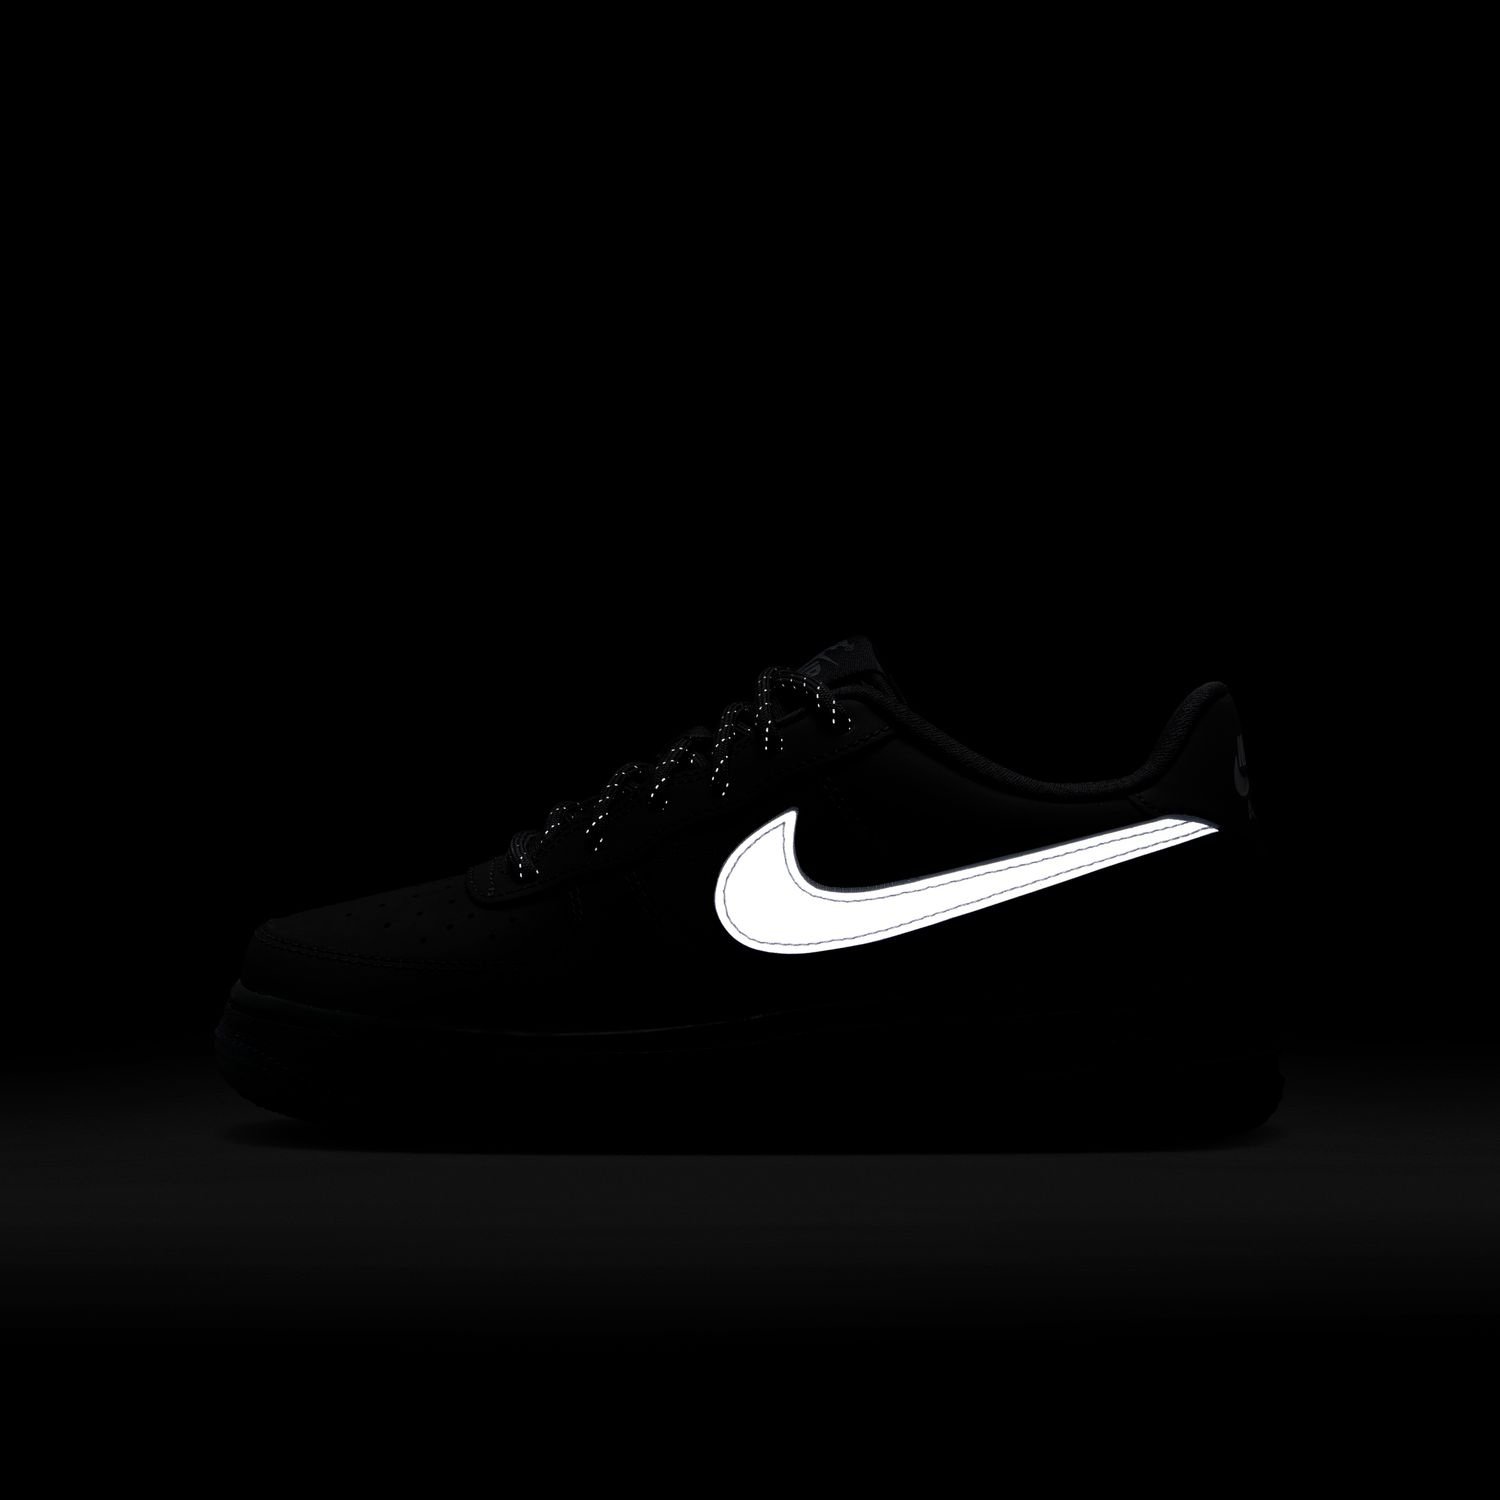 Nike Air Force 1 Low GS Reflective Swoosh FV3980-001